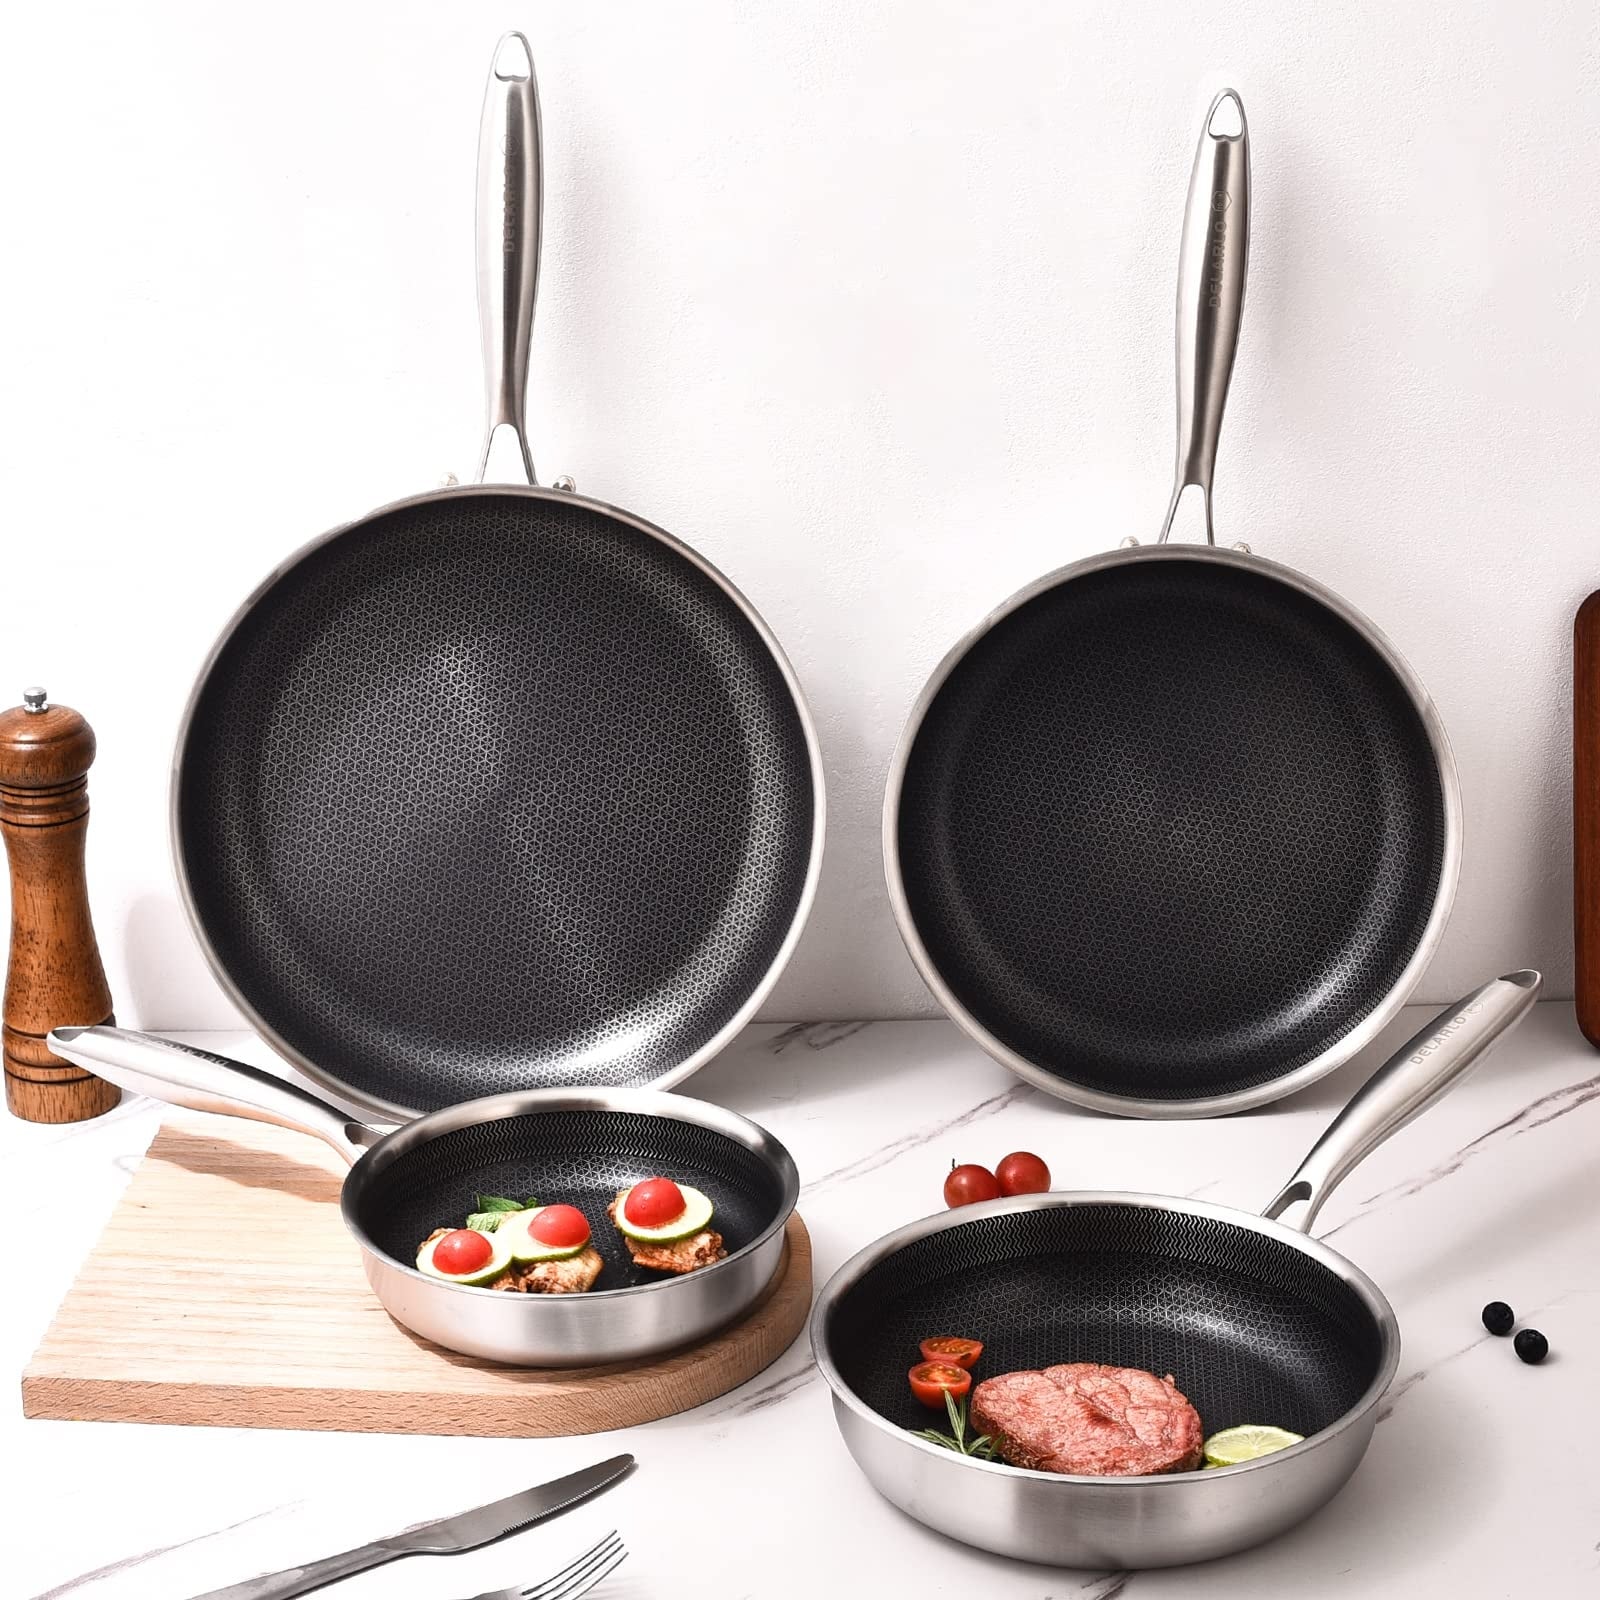 https://ak1.ostkcdn.com/images/products/is/images/direct/5151959b21ddf6d832a19d651c9557d8908a7c0a/Stainless-Steel-Frying-Pan-Set-Cooking-Pan-Skillets-Oven-Safe-Induction-Skillet%2C-Pots-and-Pans-Set.jpg